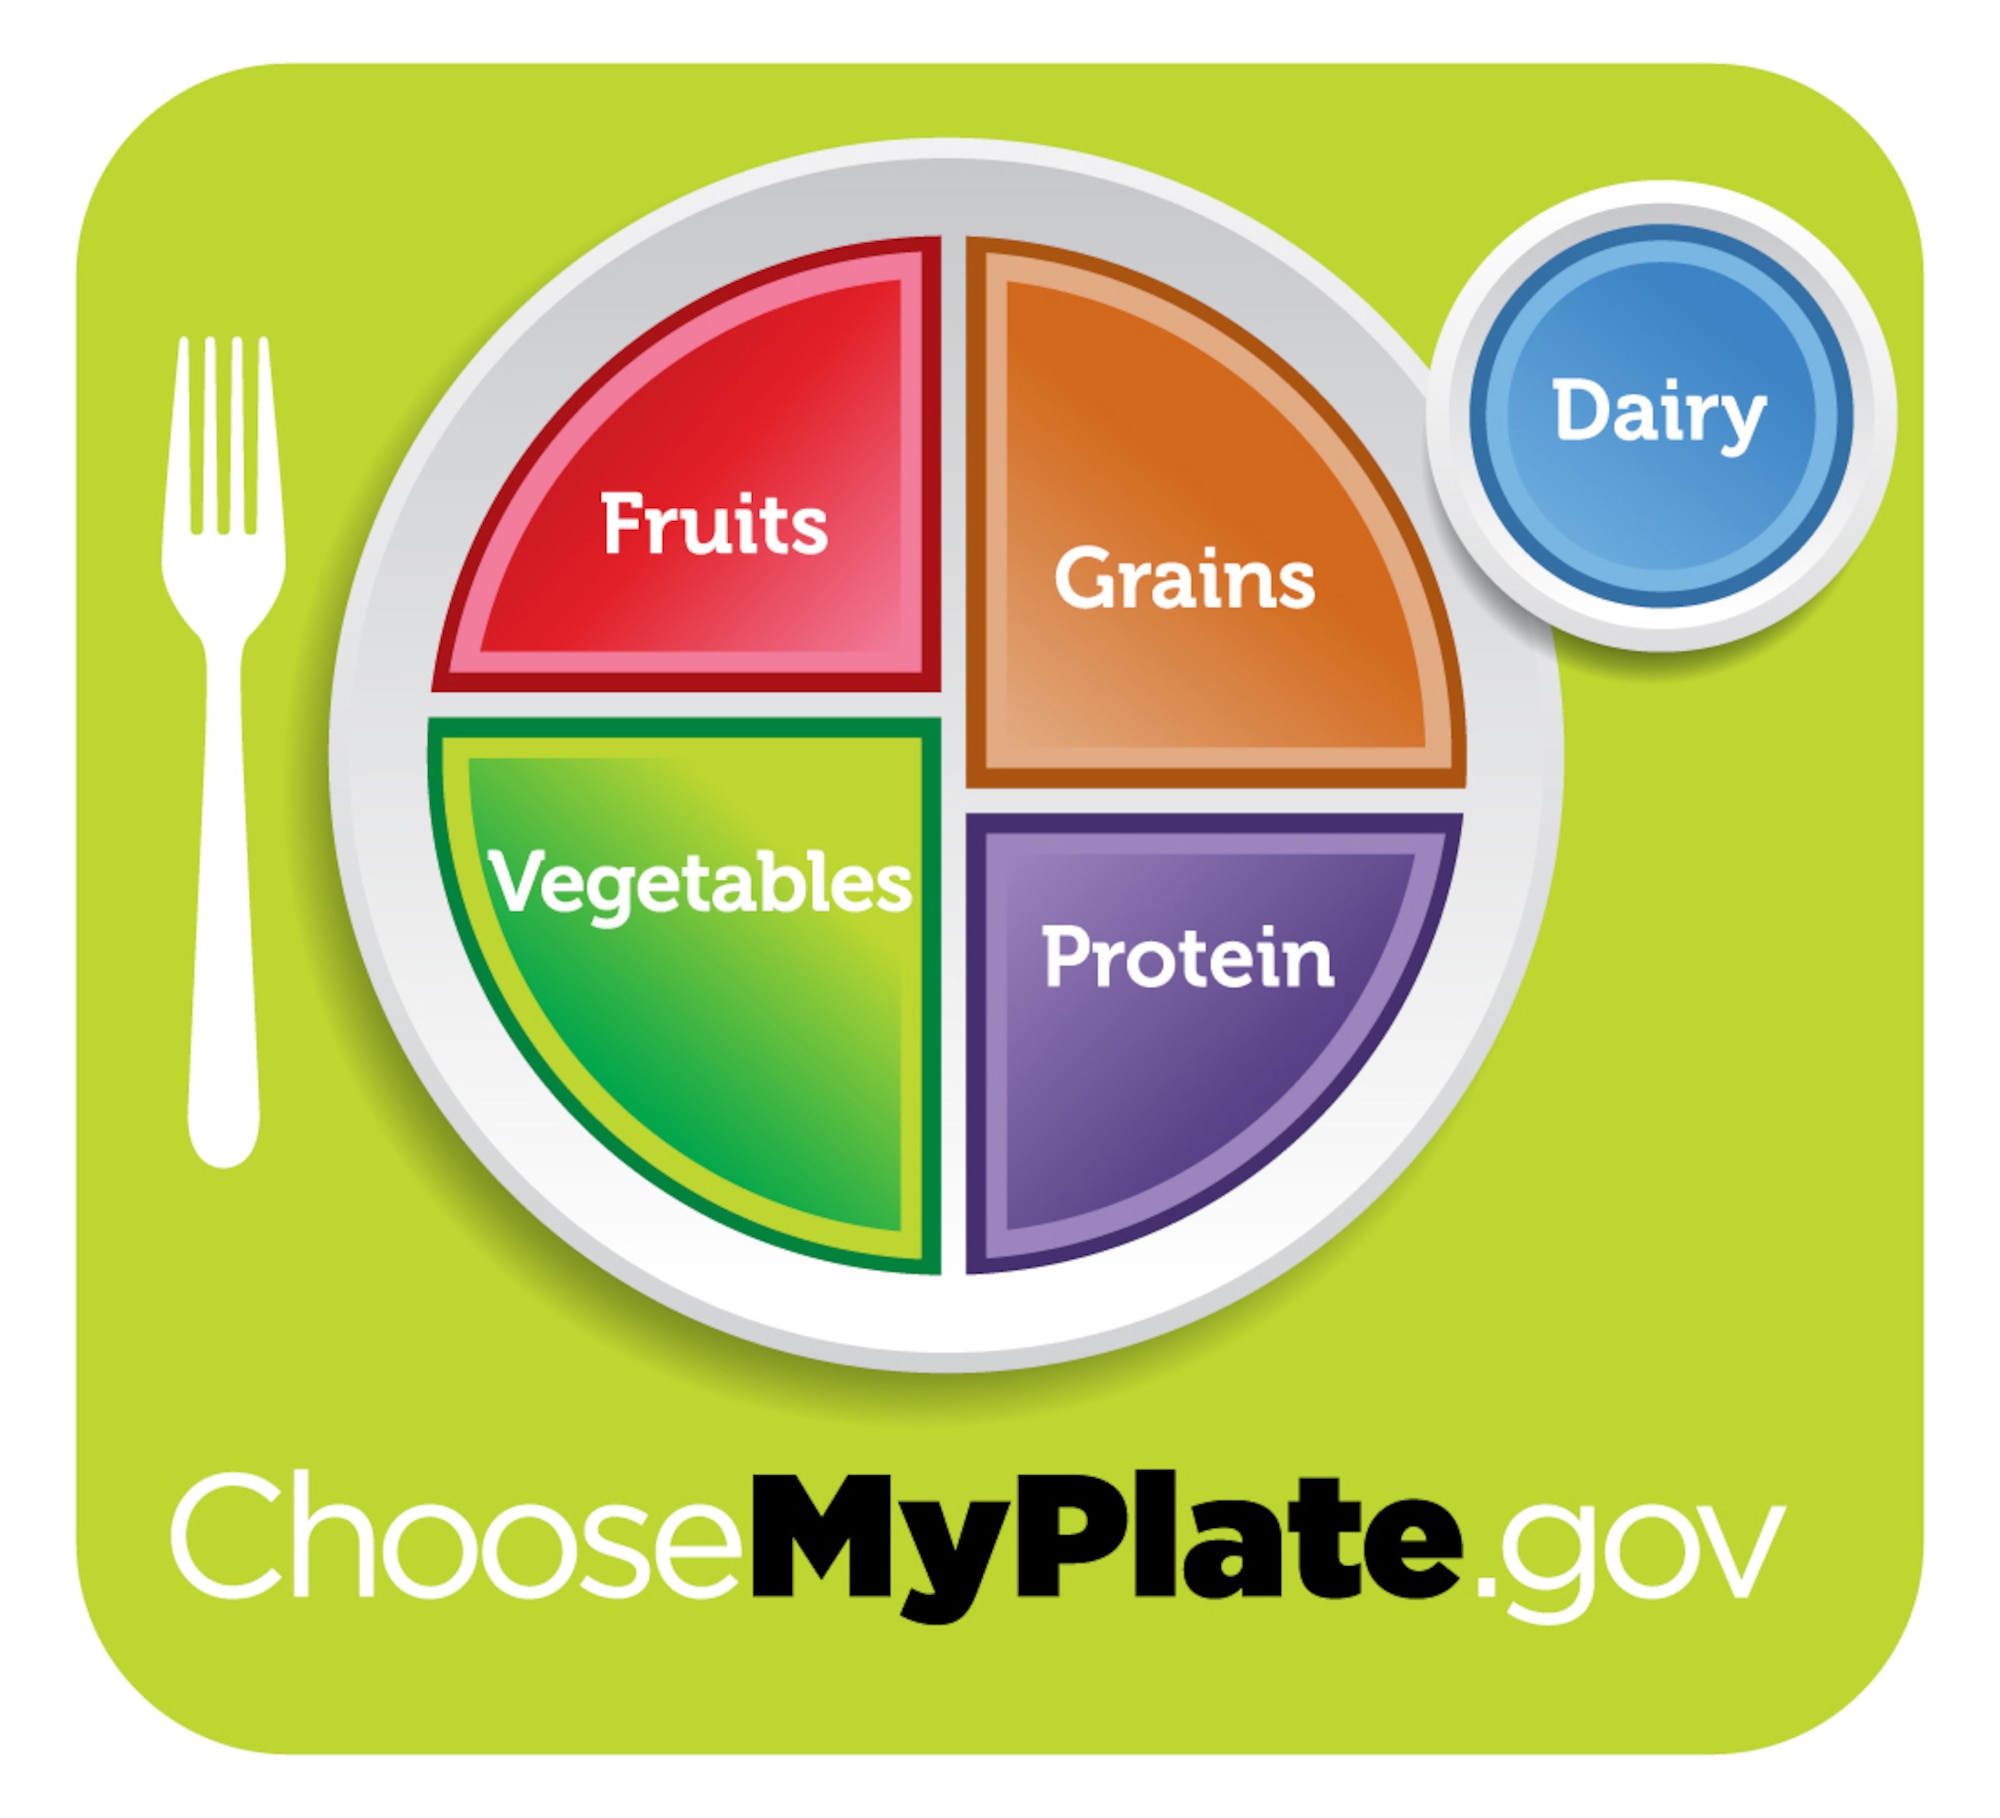 A food plate is now used to illustrate healthy meal looks like and the basics the Dietary Guidelines for Americans. (Courtesy graphic)